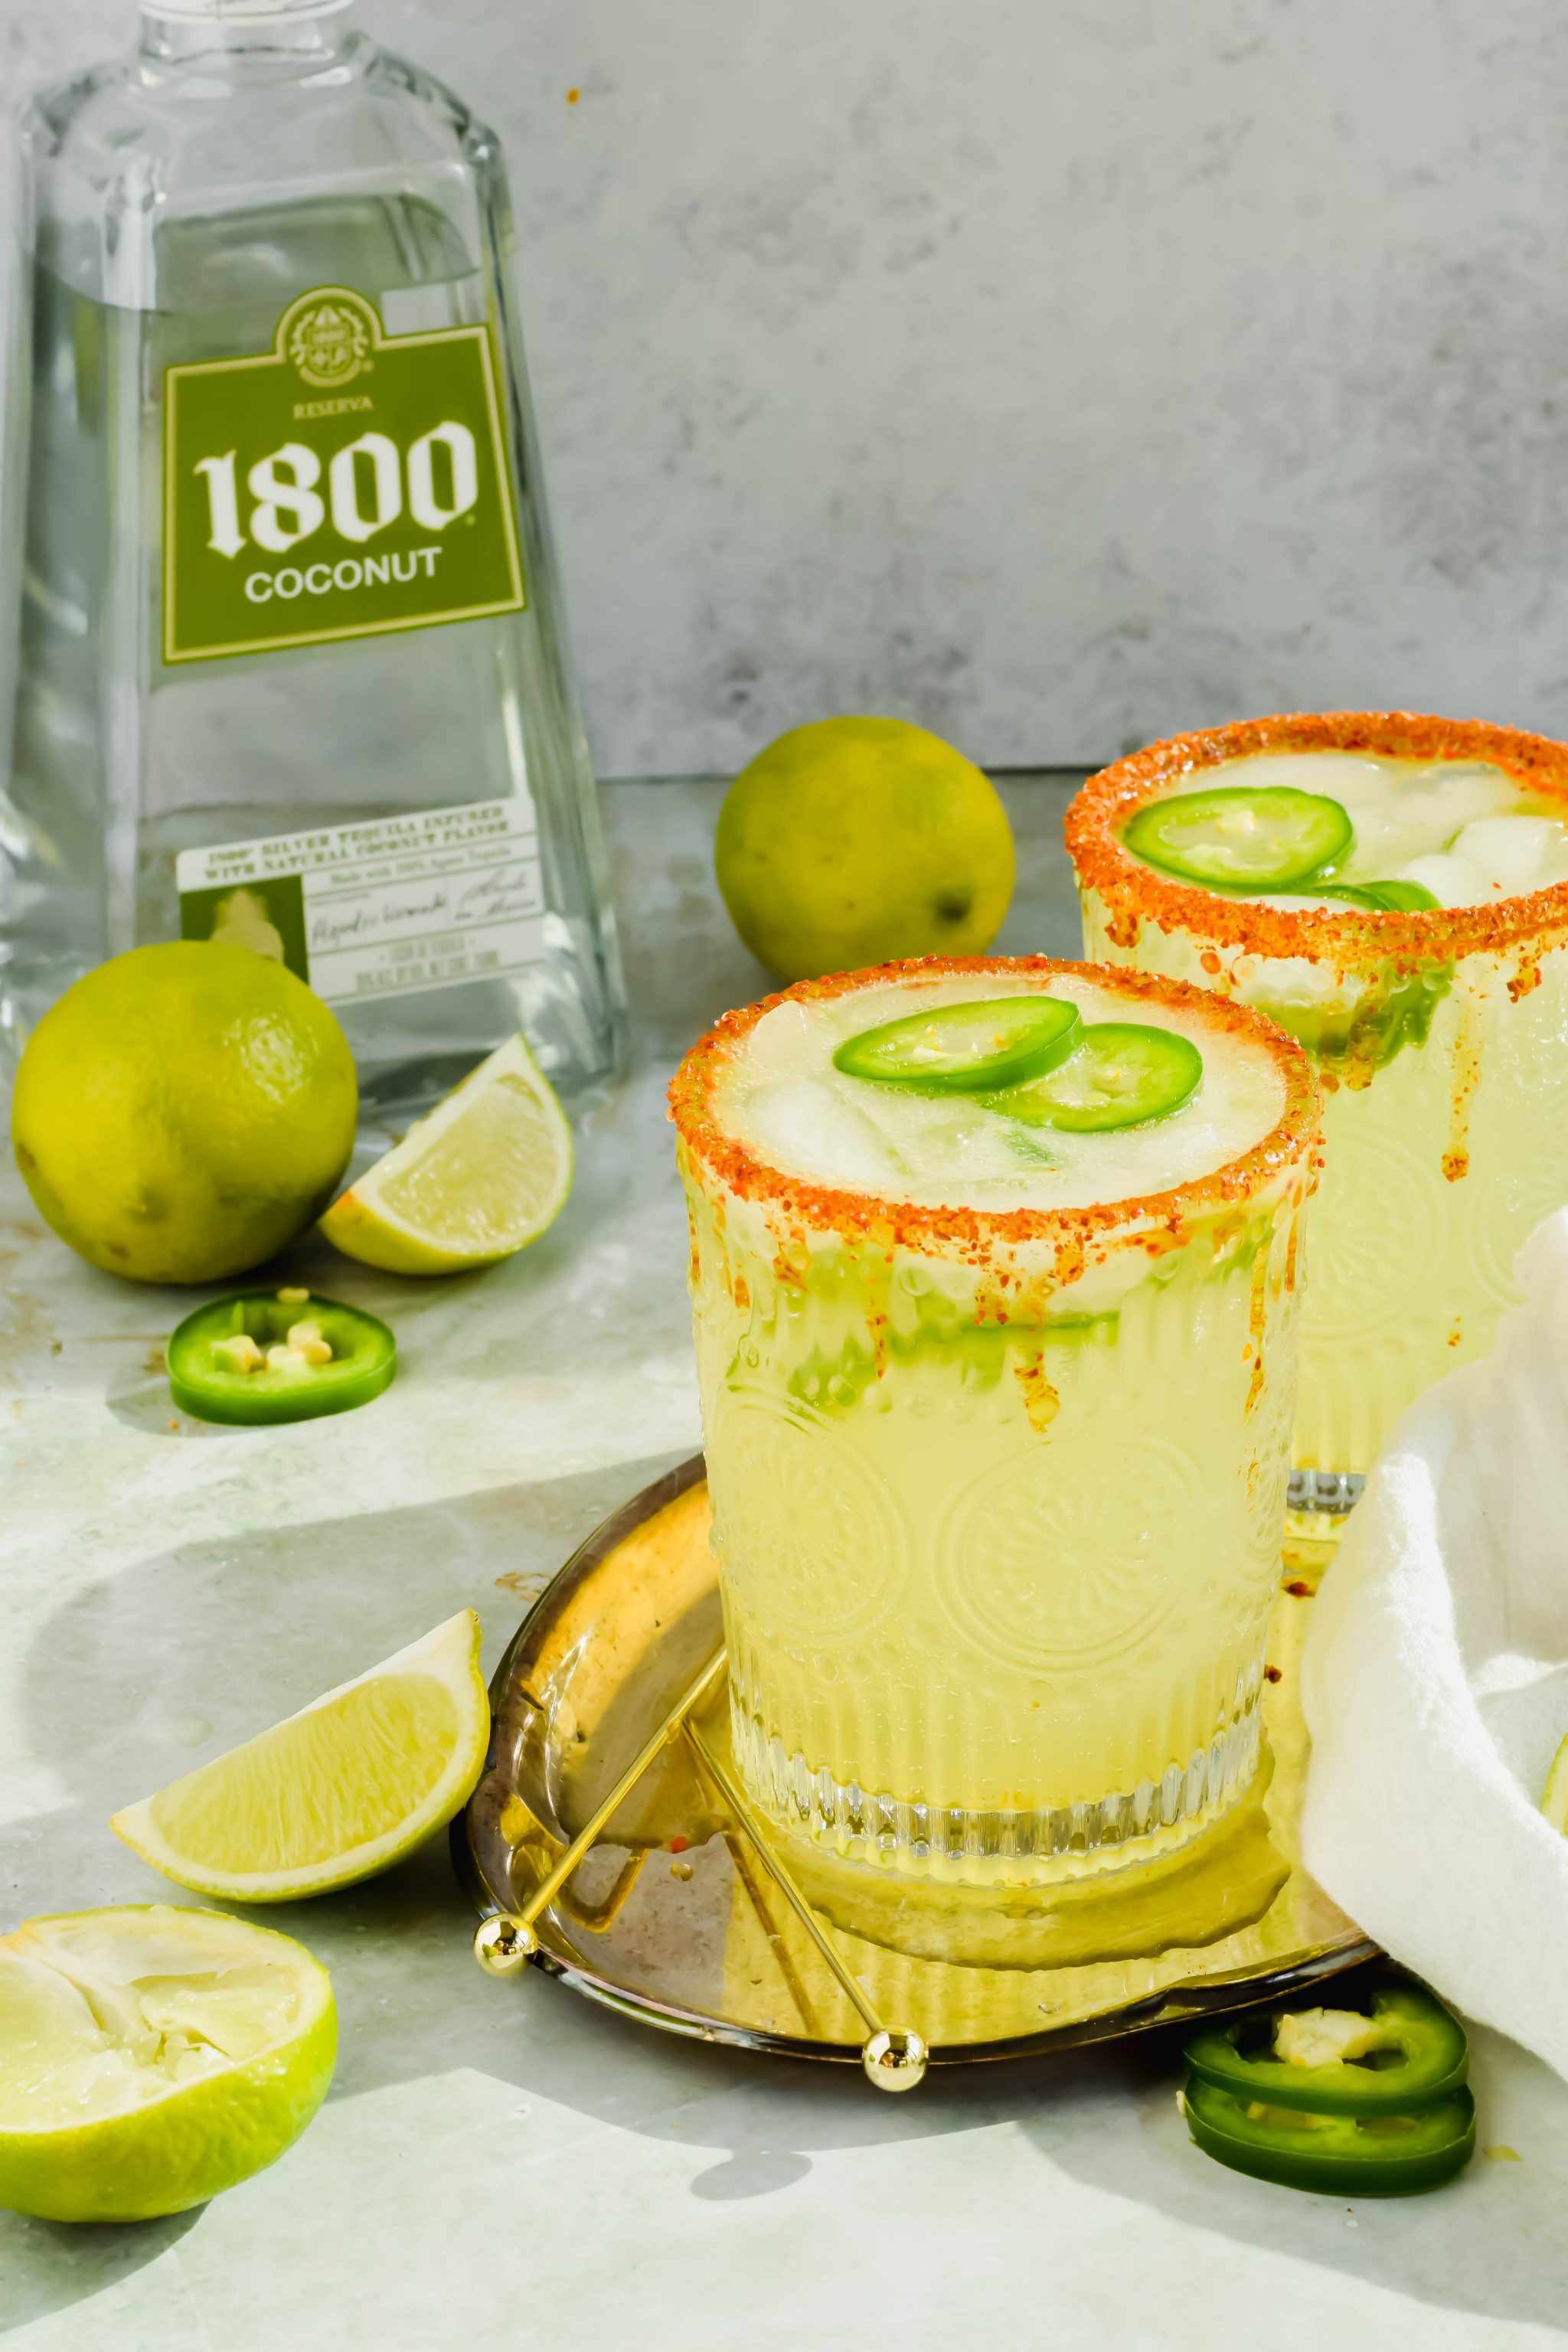 Two Spicy Skinny Jalapeno Margaritas on a gold serving tray next to toothpicks, limes, and a bottle of 1800 Coconut tequila